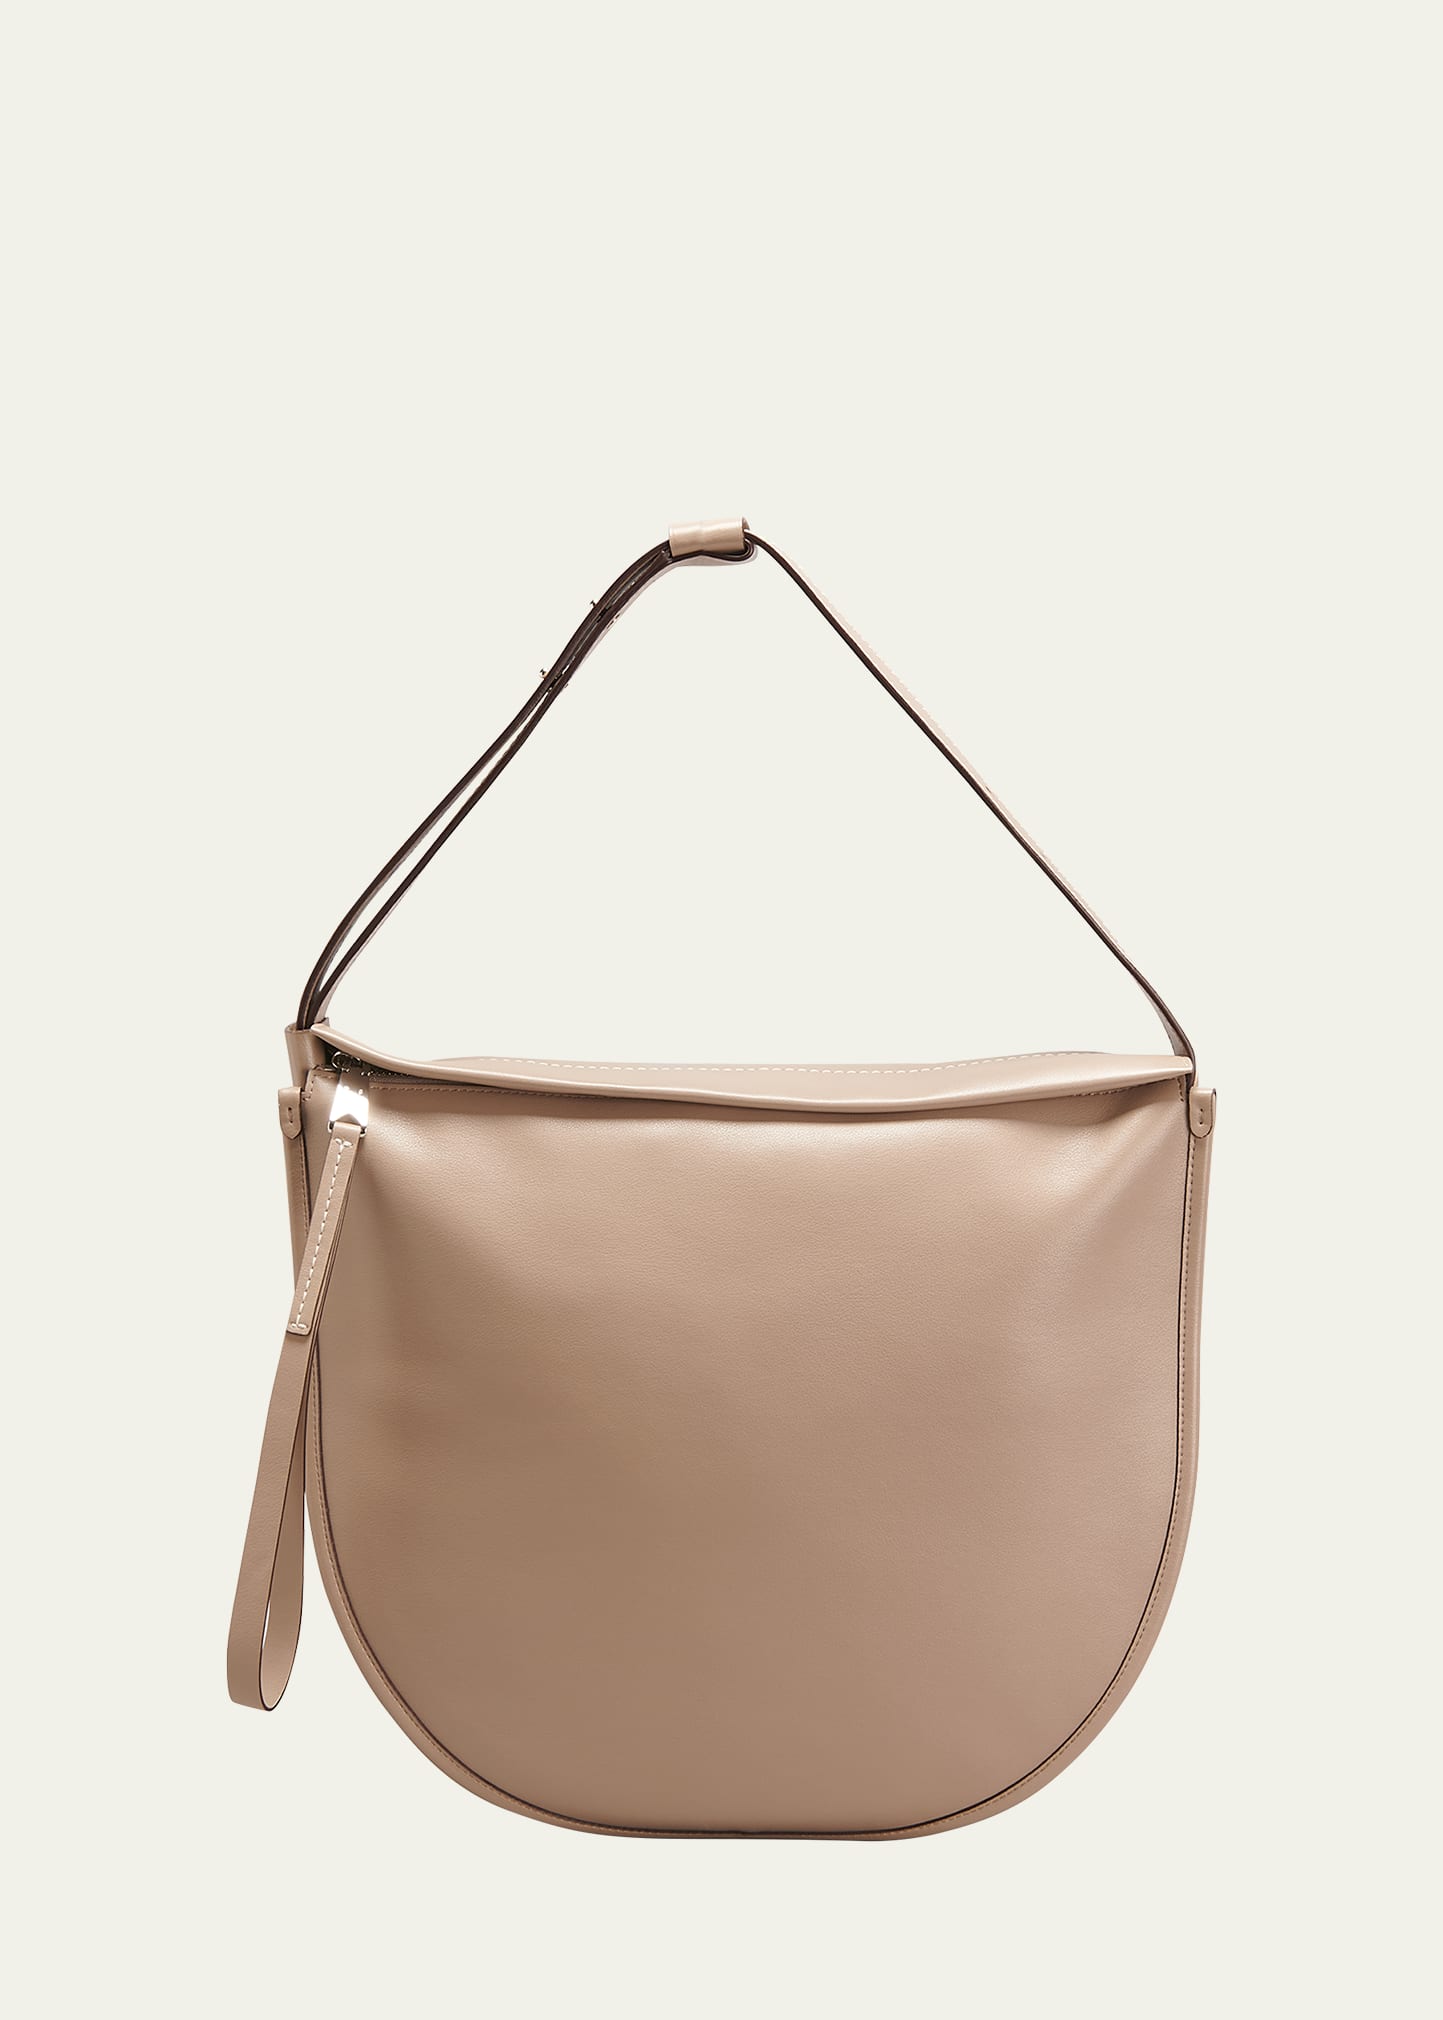 Proenza Schouler White Label Baxter Zip Leather Hobo Bag In Clay